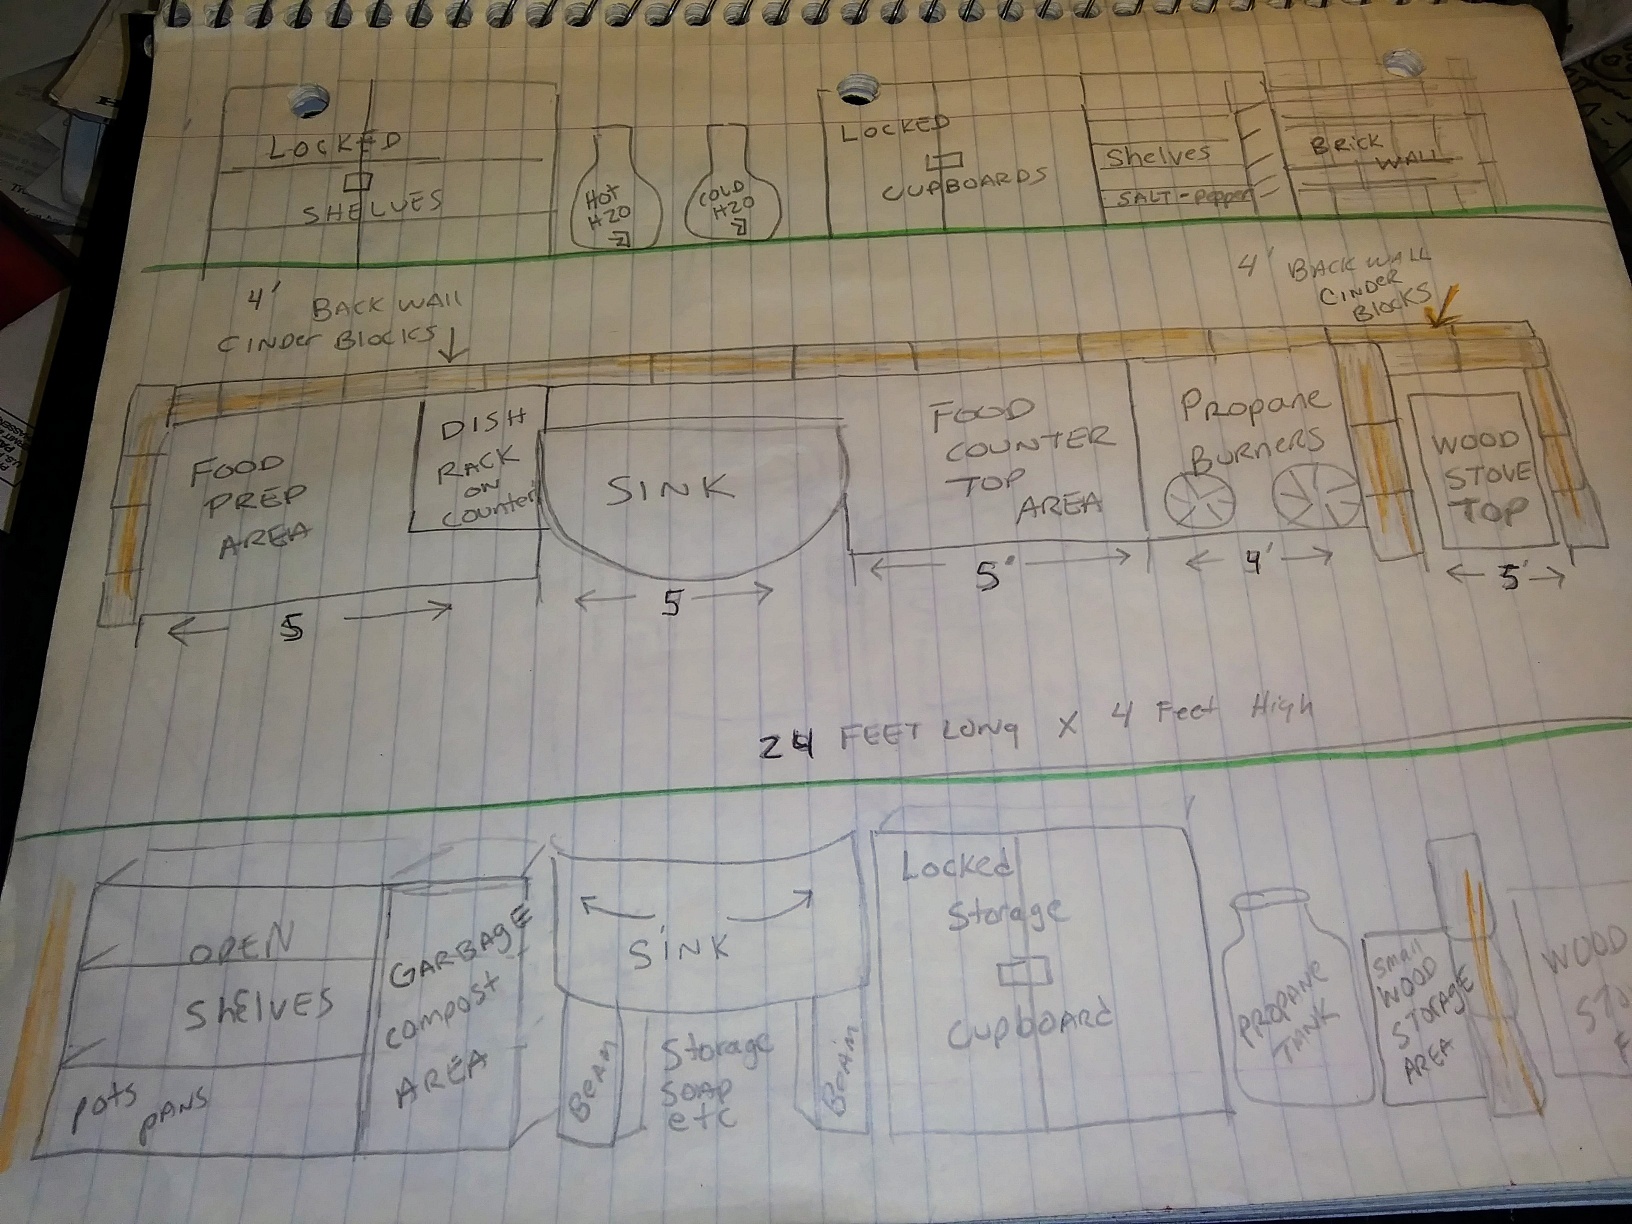 Notes and Drawing for Cooking / Sink area. I am currently collecting supplies and components for an outdoor kitchen area - this is a sketch of the idea I'm planning 